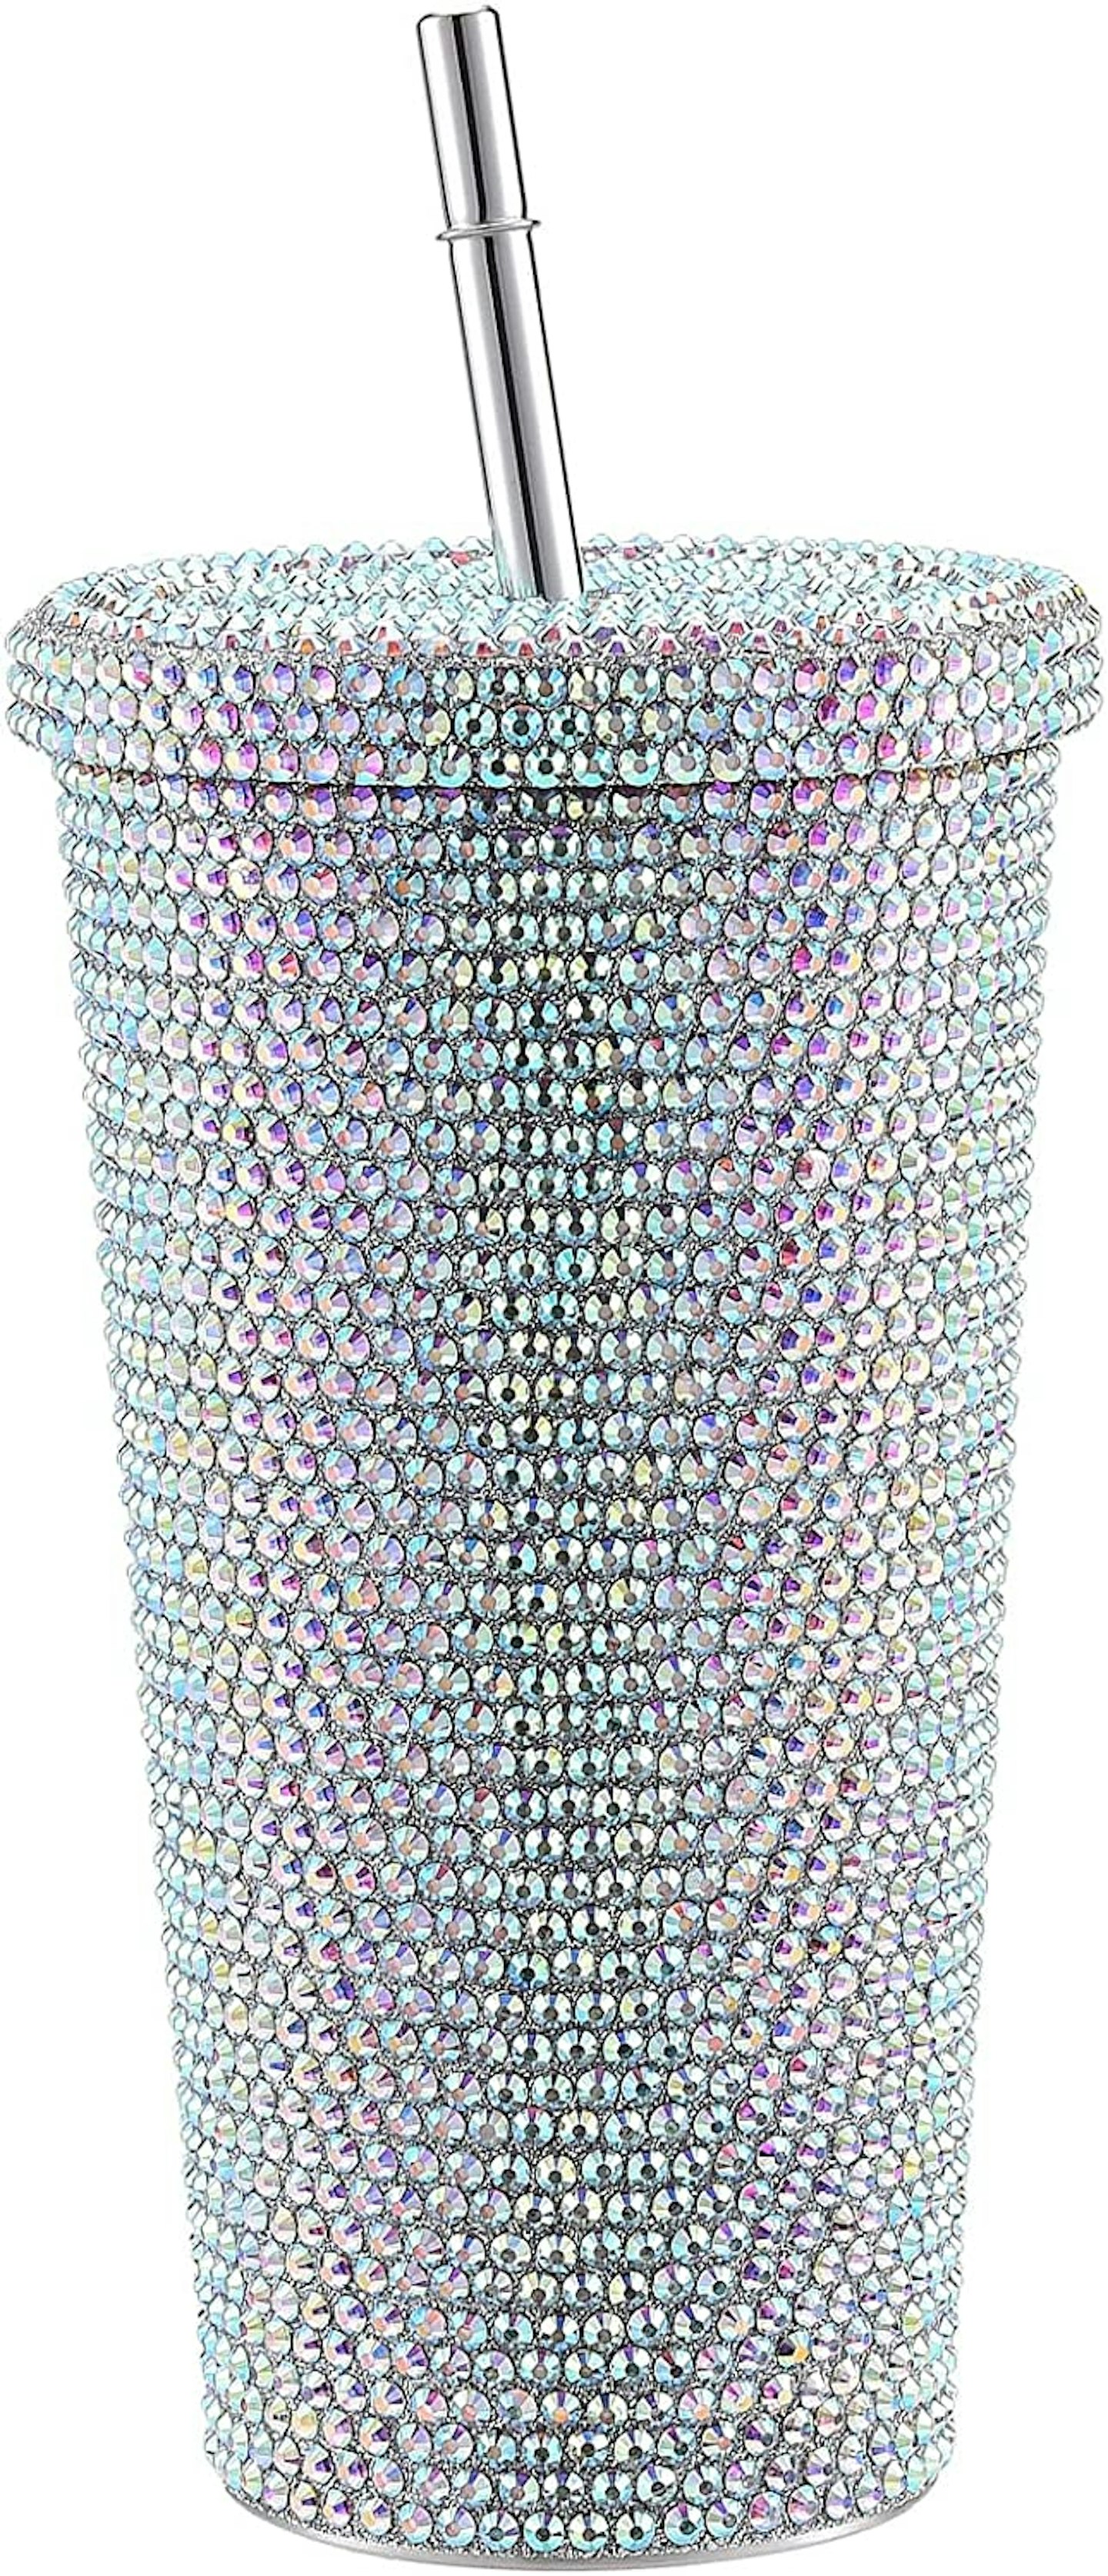 bling cup 